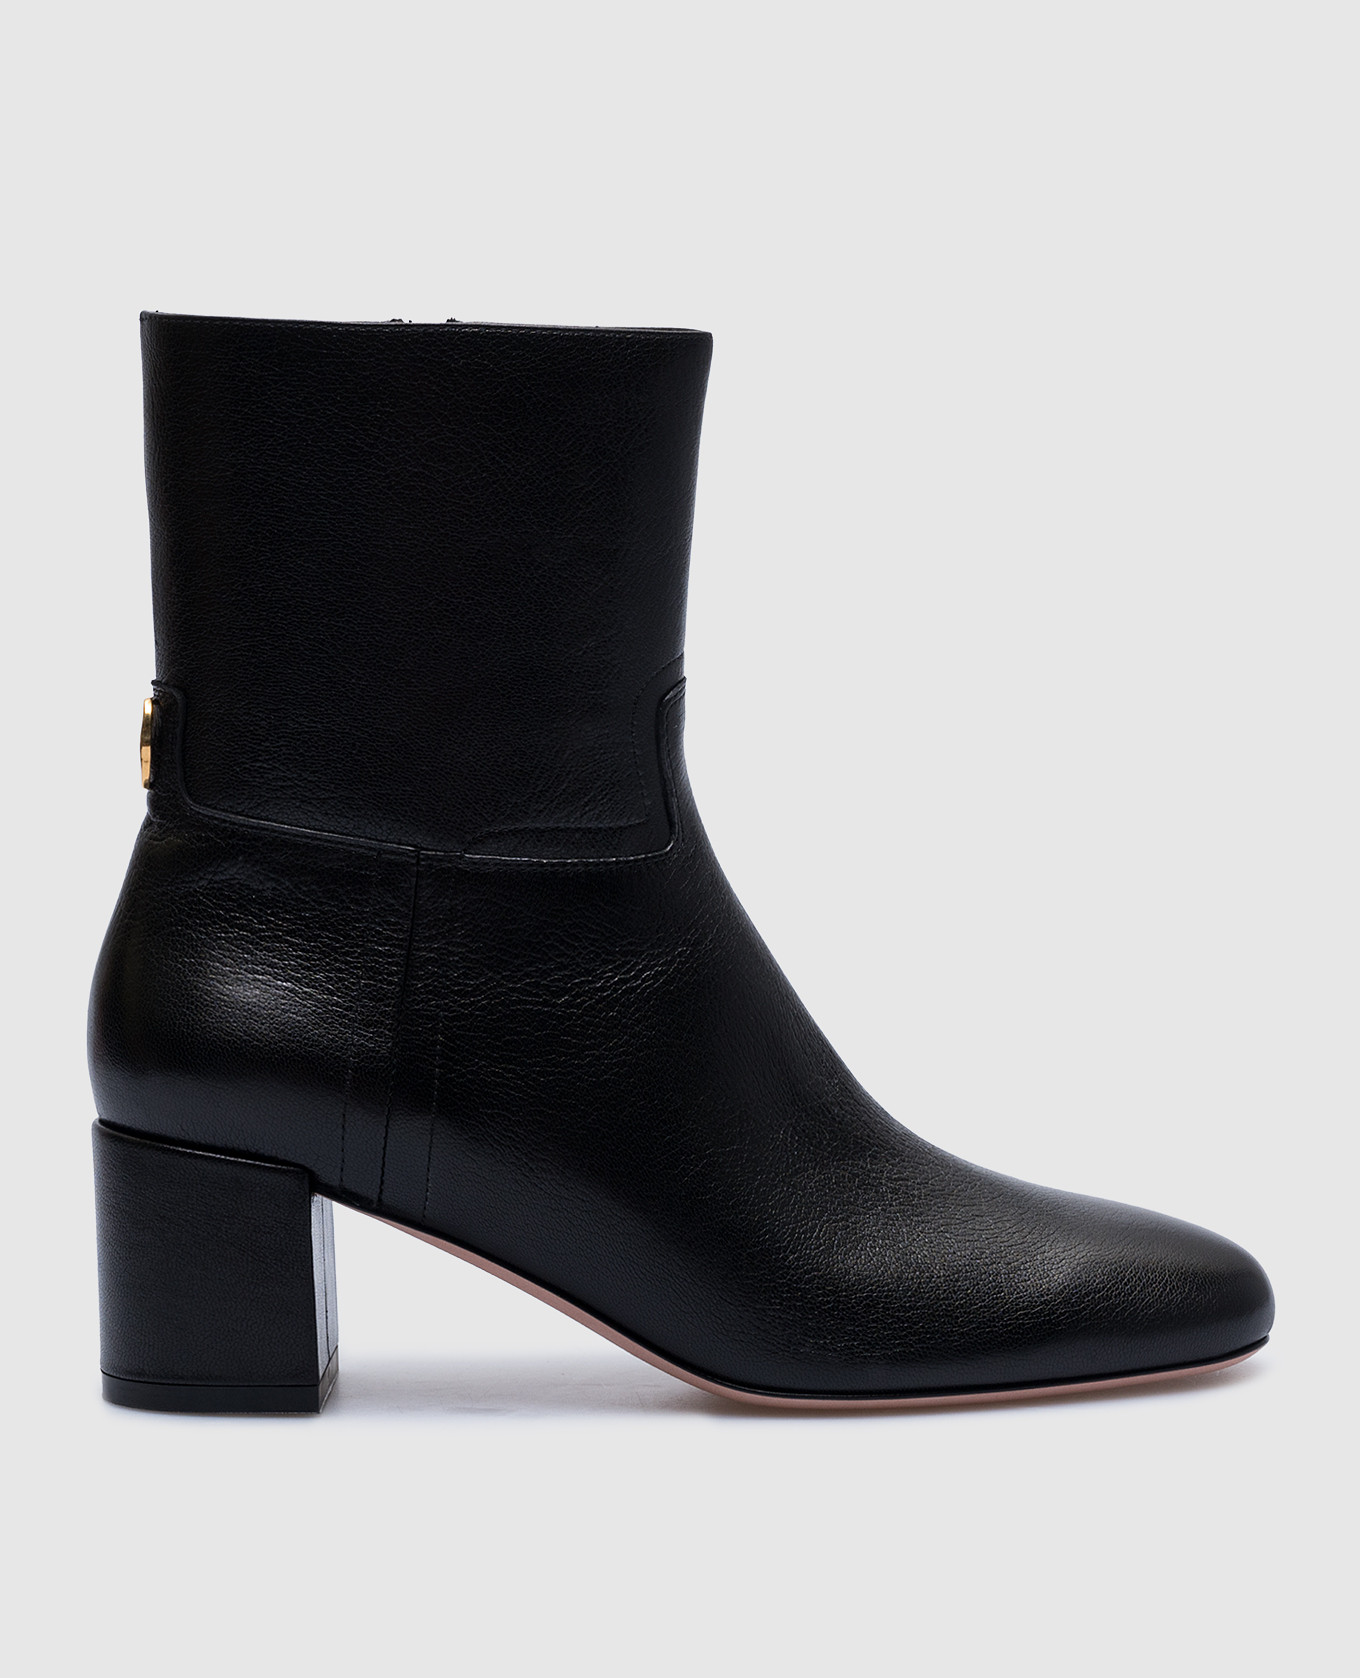 Otavine logo ankle boots in black leather